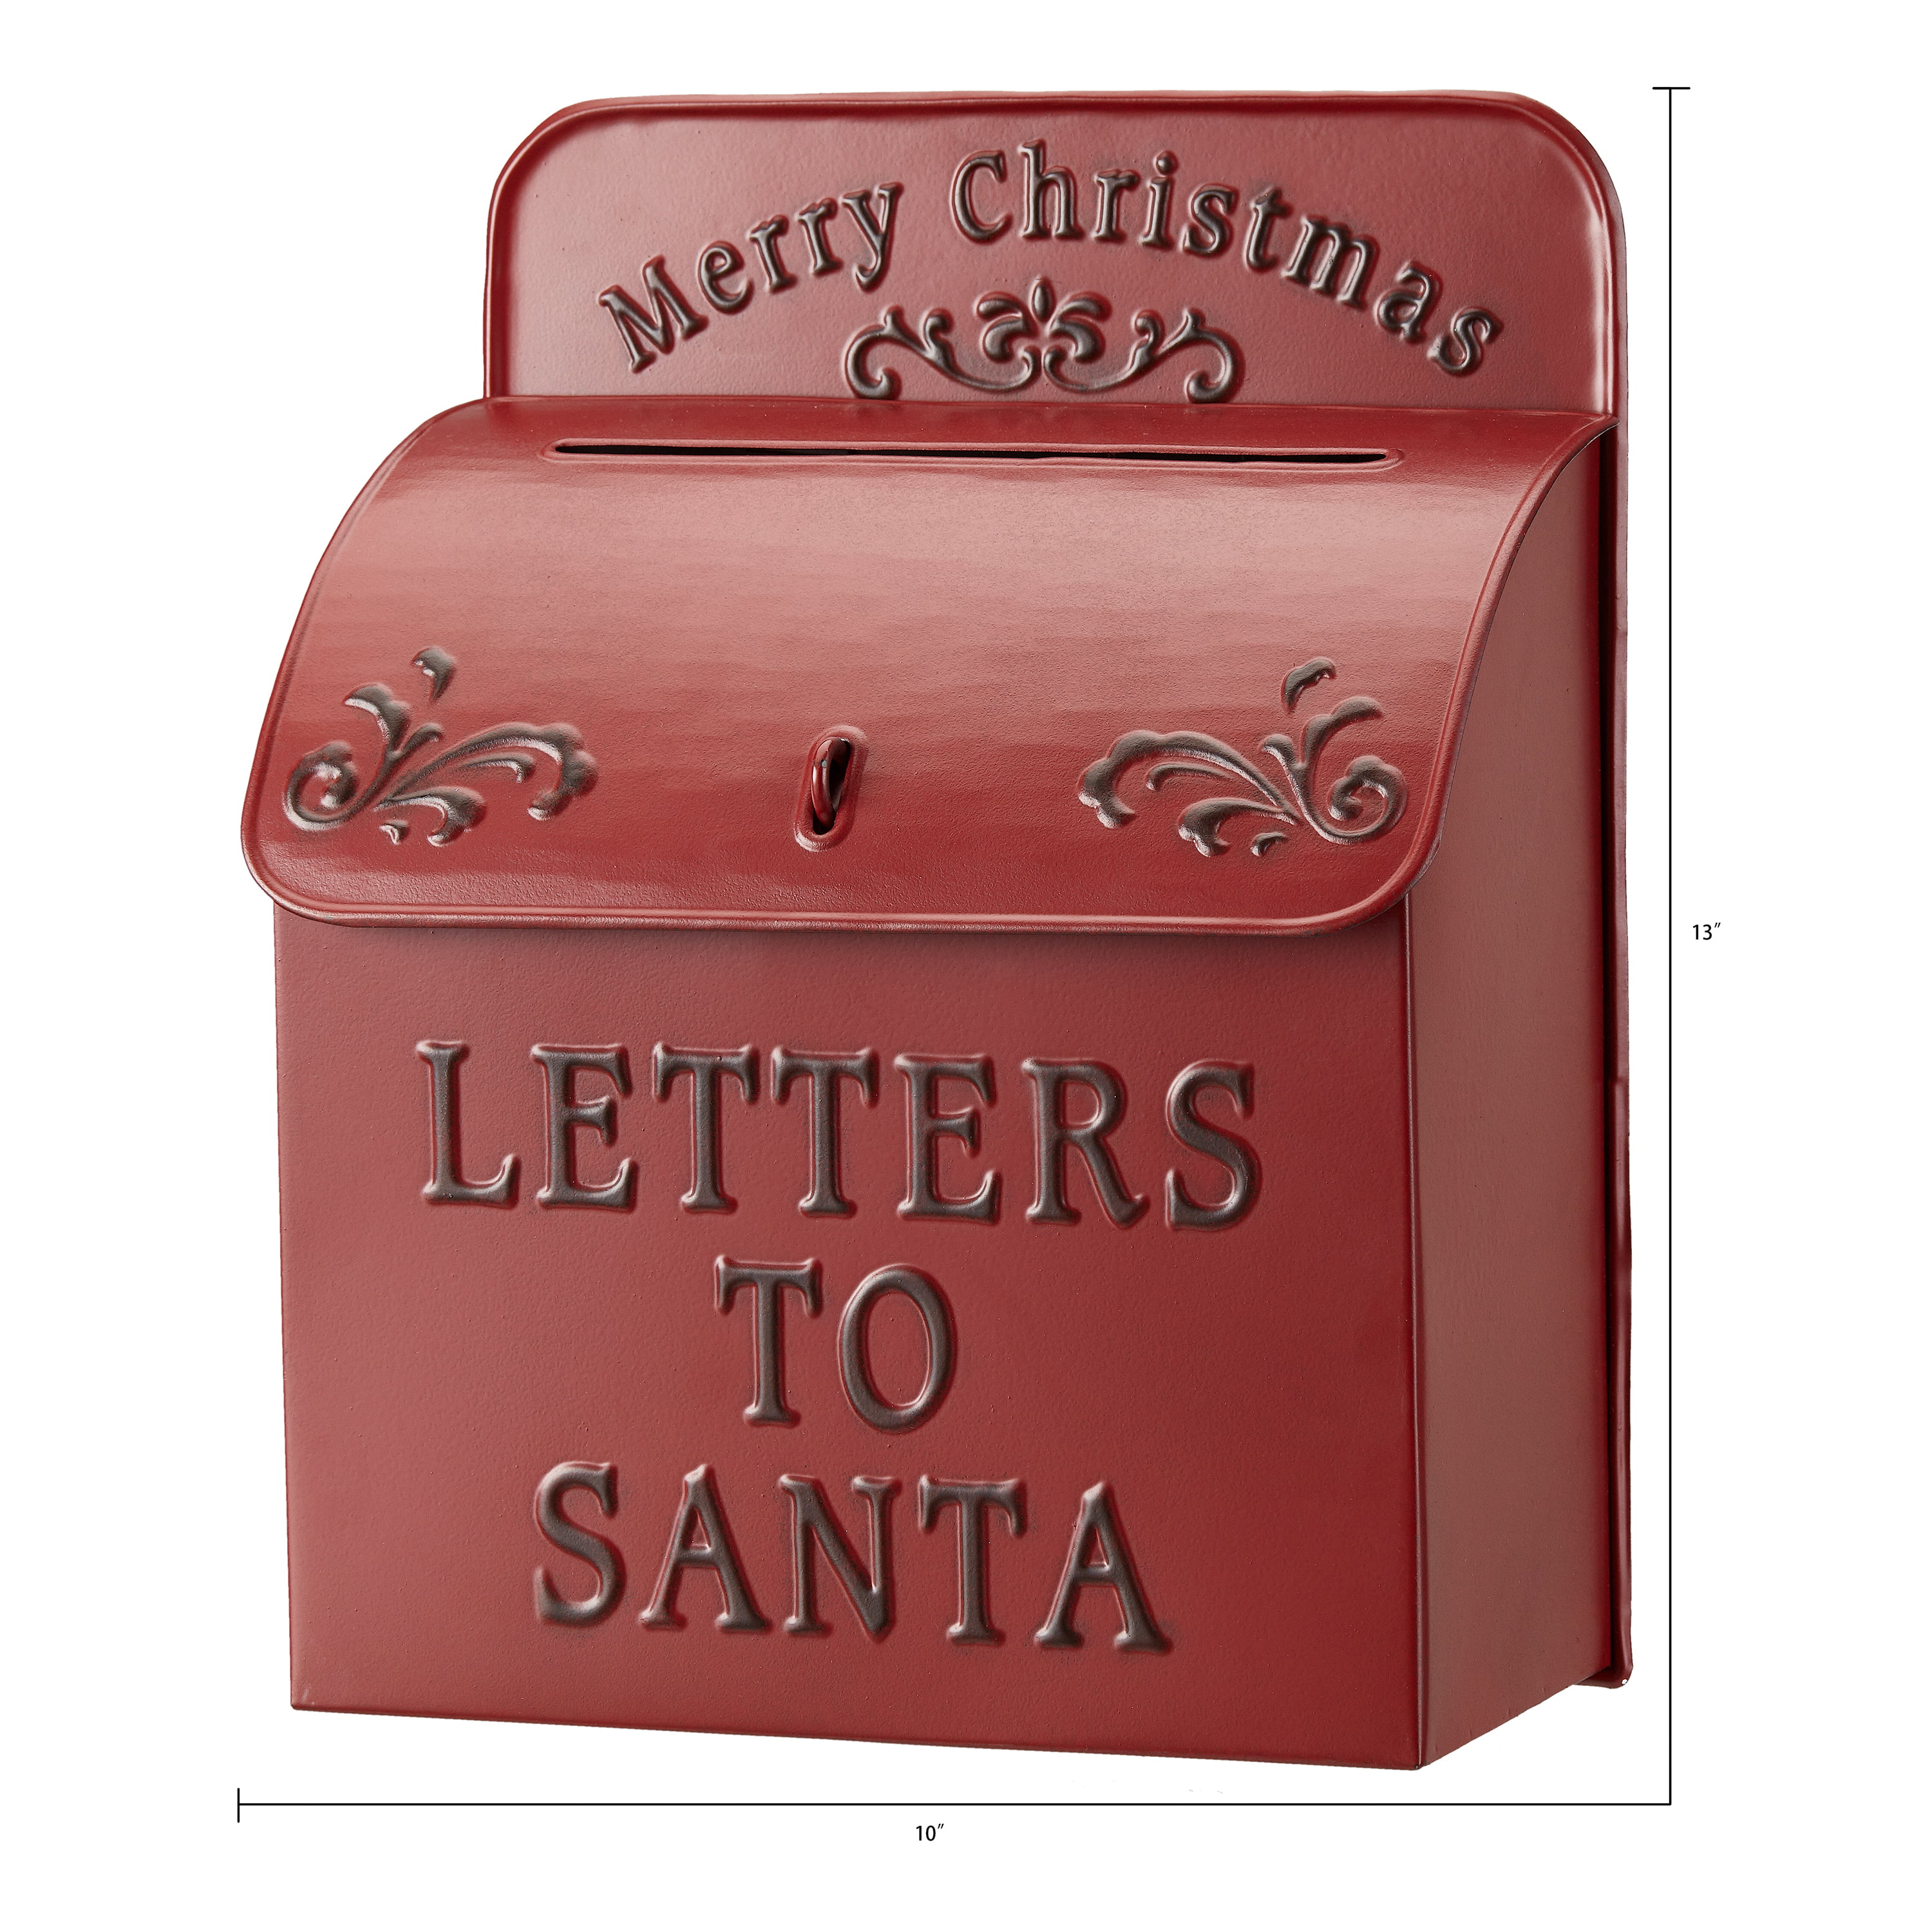 Vintage style Tin Mail Box Decorative~LETTER TO SANTA~ Post Box Rusty WAS 22.95 